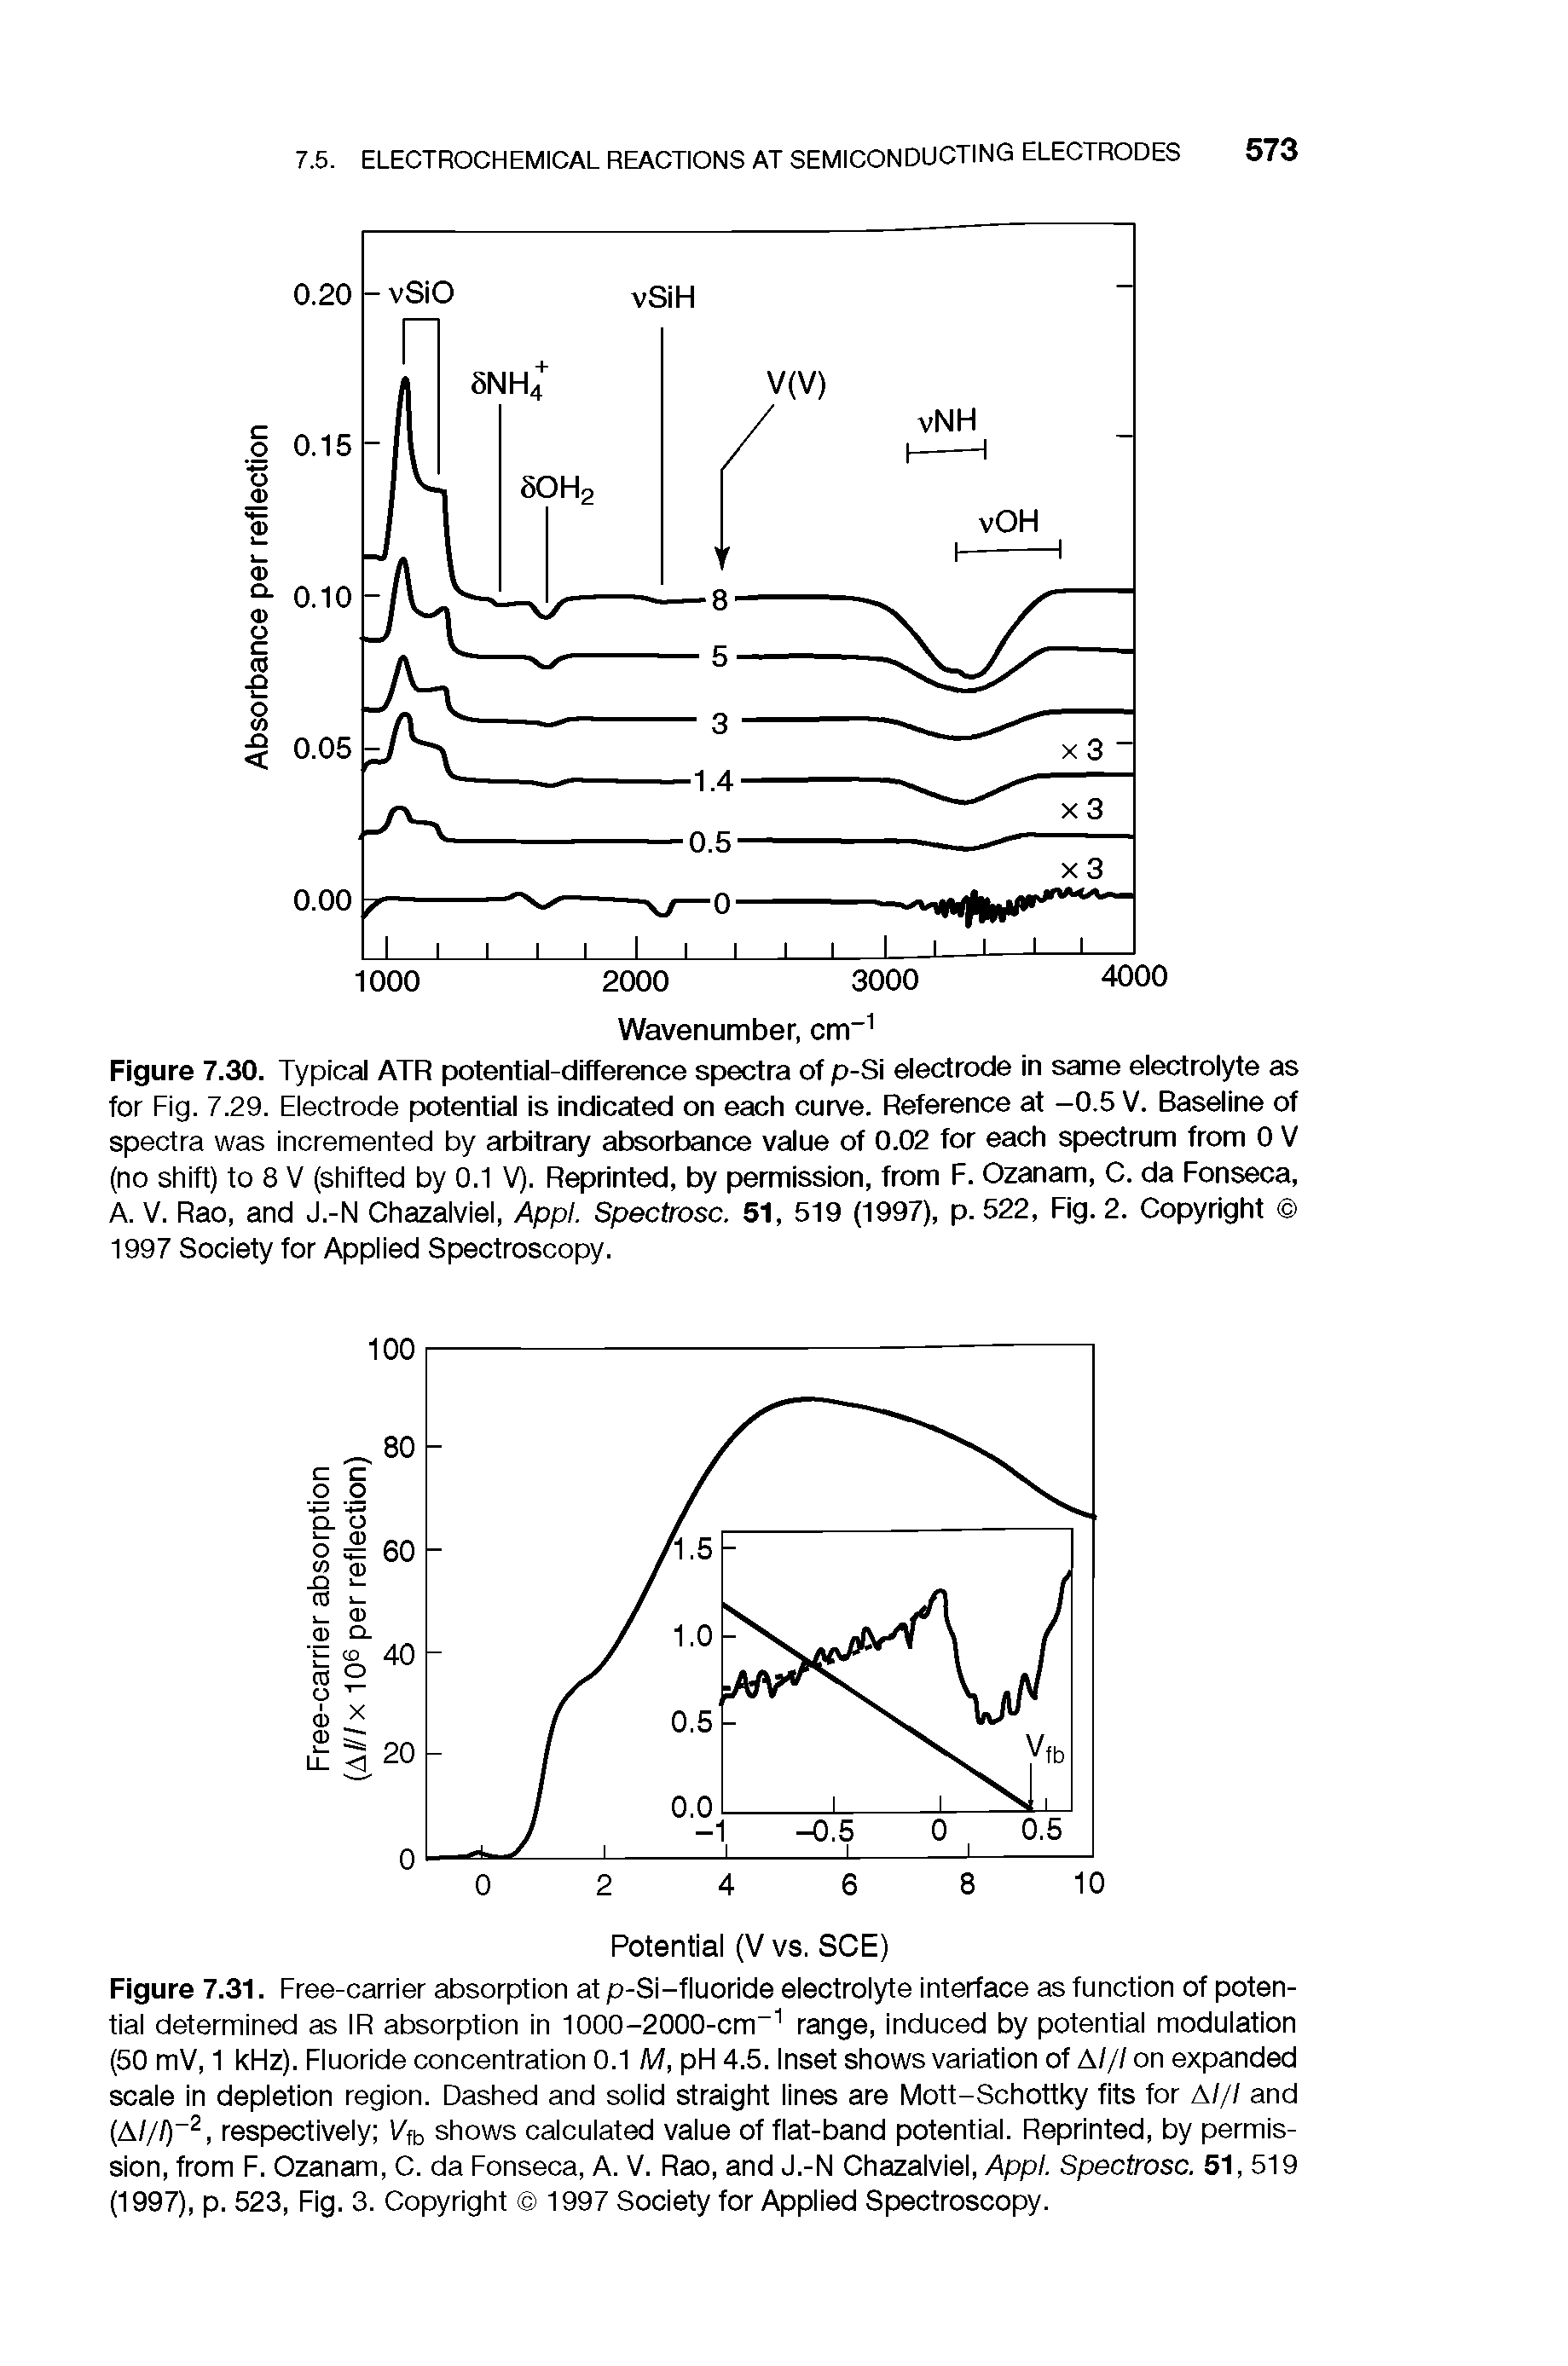 Figure 7.31. Free-carrier absorption at p-Si-fluoride electrolyte interface as function of potential determined as IR absorption in 1000-2000-cm range, induced by potential modulation (50 mV, 1 kFIz). Fluoride concentration 0.1 M, phi 4.5. Inset shows variation of A/// on expanded scale in depletion region. Dashed and solid straight lines are Mott-Schottky fits for A/// and (A///)", respectively l/ft, shows calculated value of flat-band potential. Reprinted, by permission, from F. Ozanam, C. da Fonseca, A. V. Rao, and J.-N Chazalviel, Appl. Spectrosc. 51,519 (1997), p. 523, Fig. 3. Copyright 1997 Society for Applied Spectroscopy.